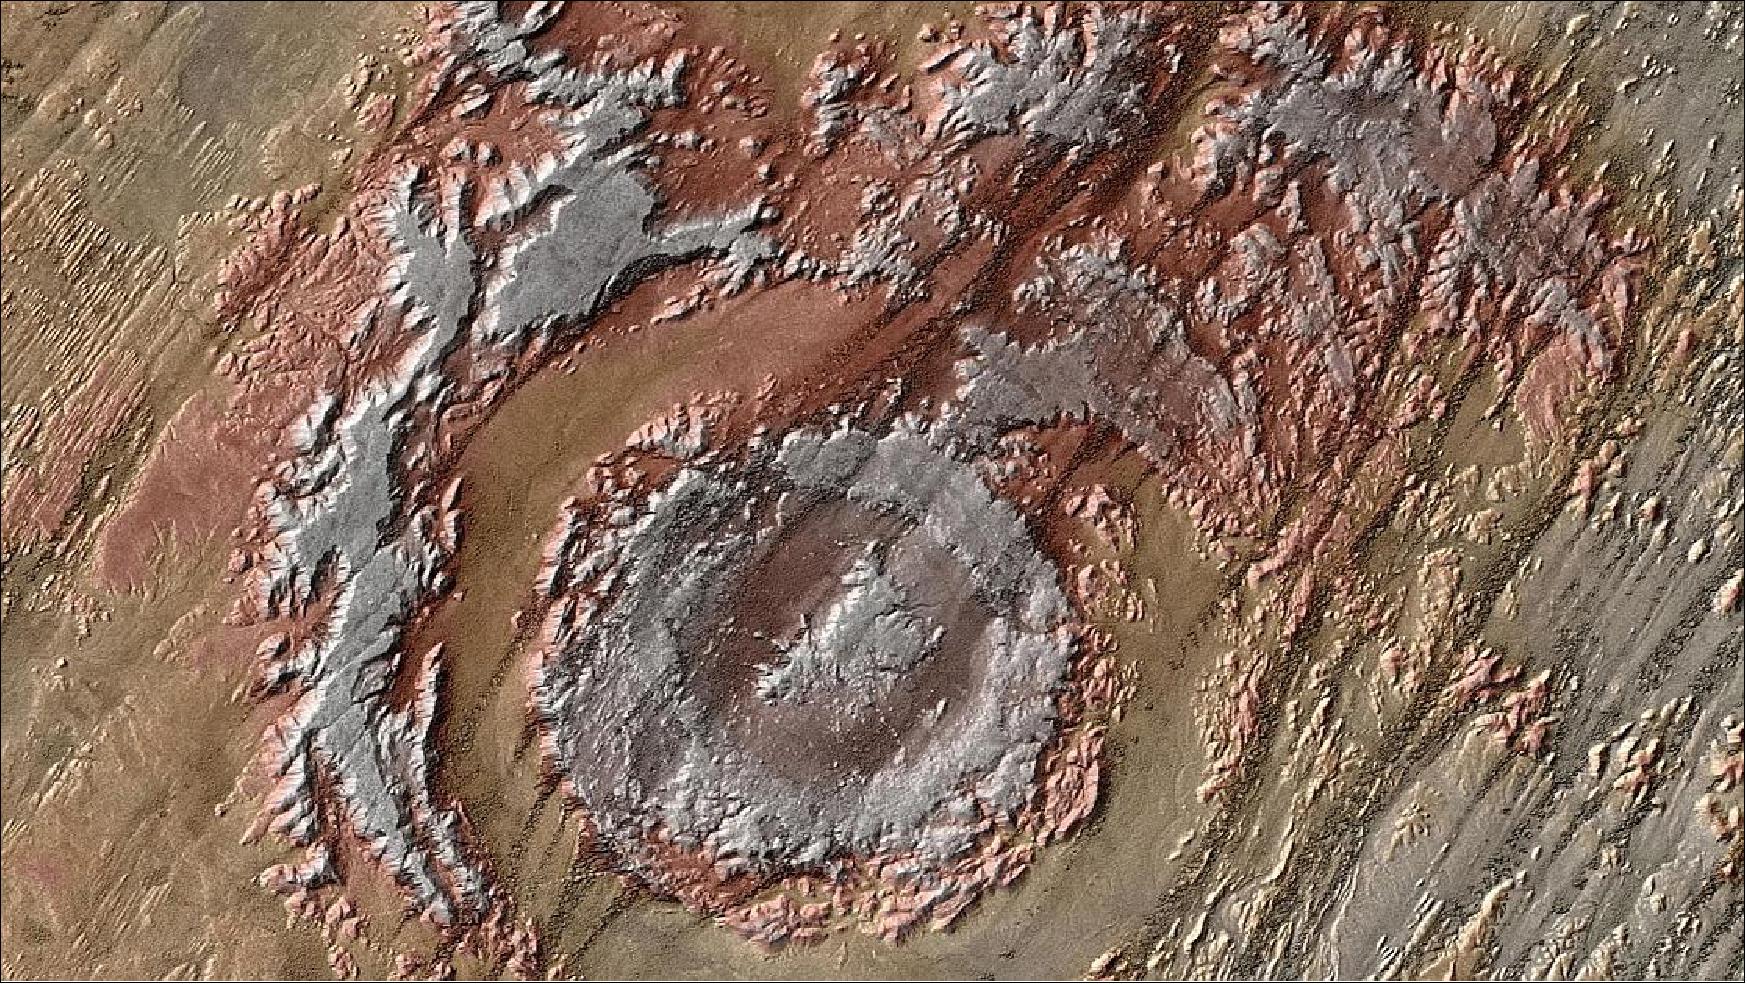 Figure 53: This image, acquired by the TanDEM-X satellite, shows the Aorounga impact crater in Chad, North Africa. It is ~345 million years old, thus very heavily weathered. From space, both the inner and outer rings of the crater are visible (about 17 km in diameter), formed as part of a multiple impact event. Strong winds have acted as builders, carving parallel structures into the ground; they consists of wind-resistant rocky proturberances, referred to as yardangs, through which the sand dunes meander, carried by the wind (image credit: DLR)